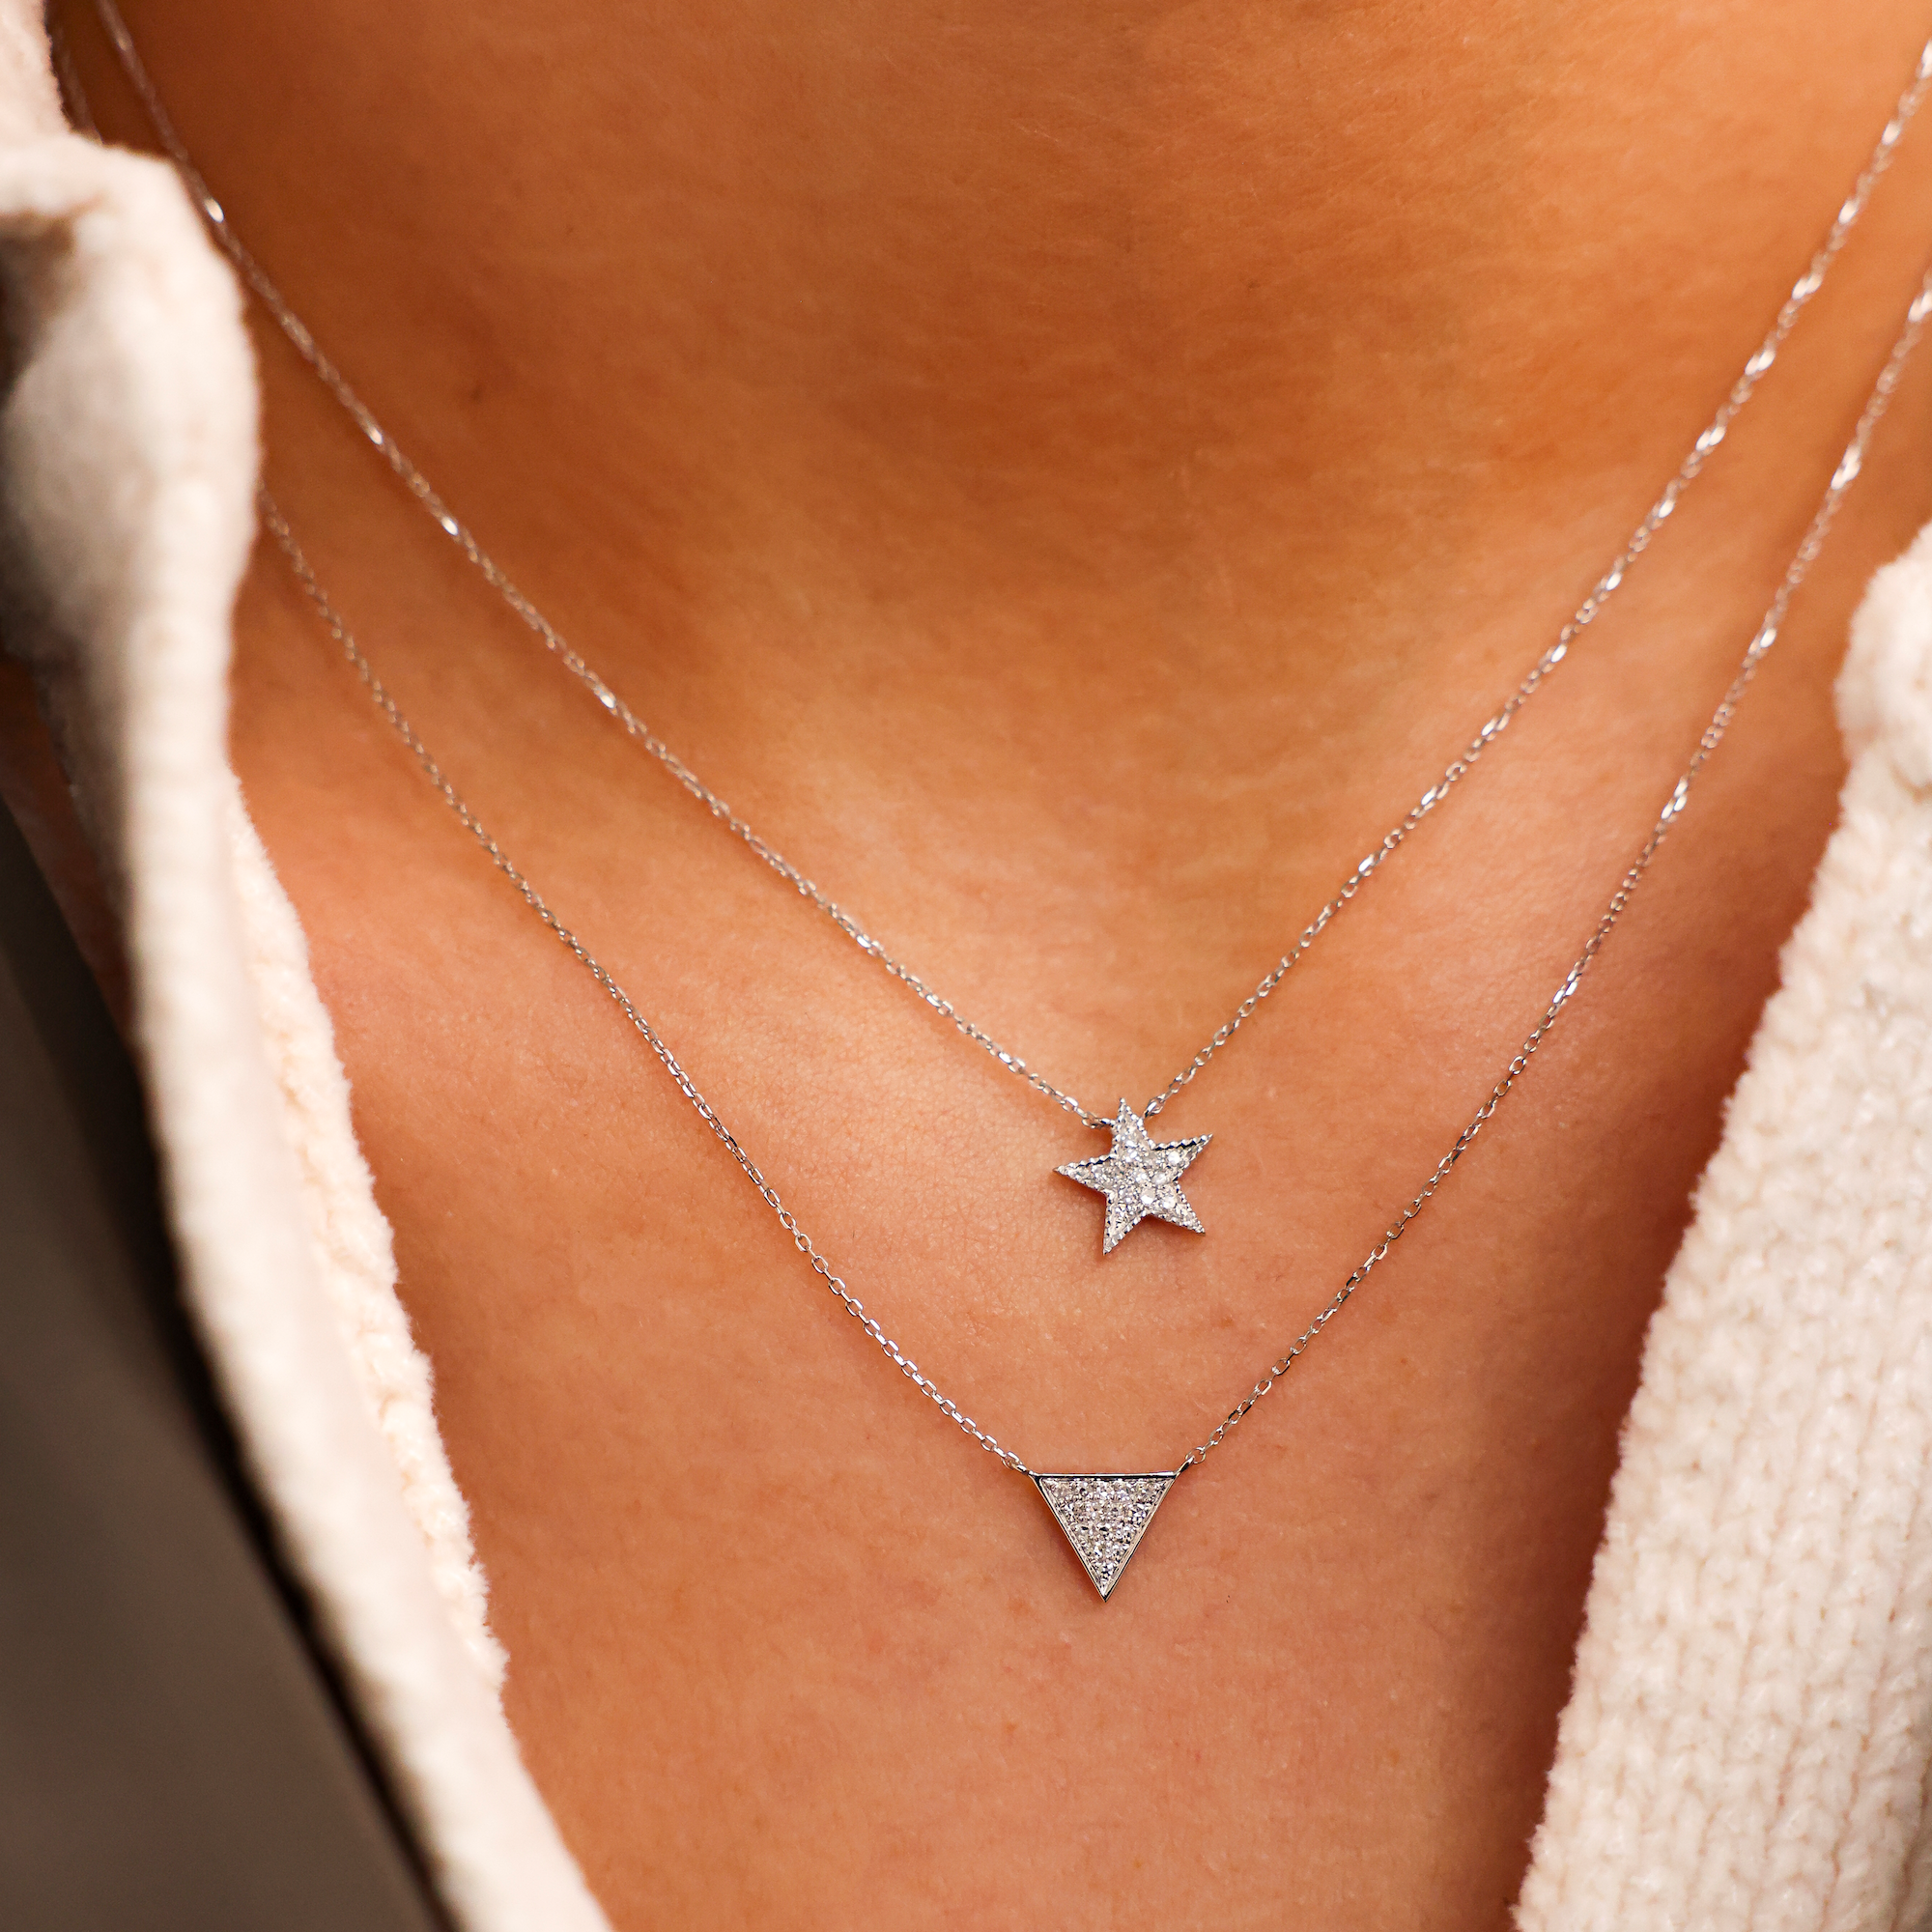 Star necklace by SoCharm adorned with a real white diamond